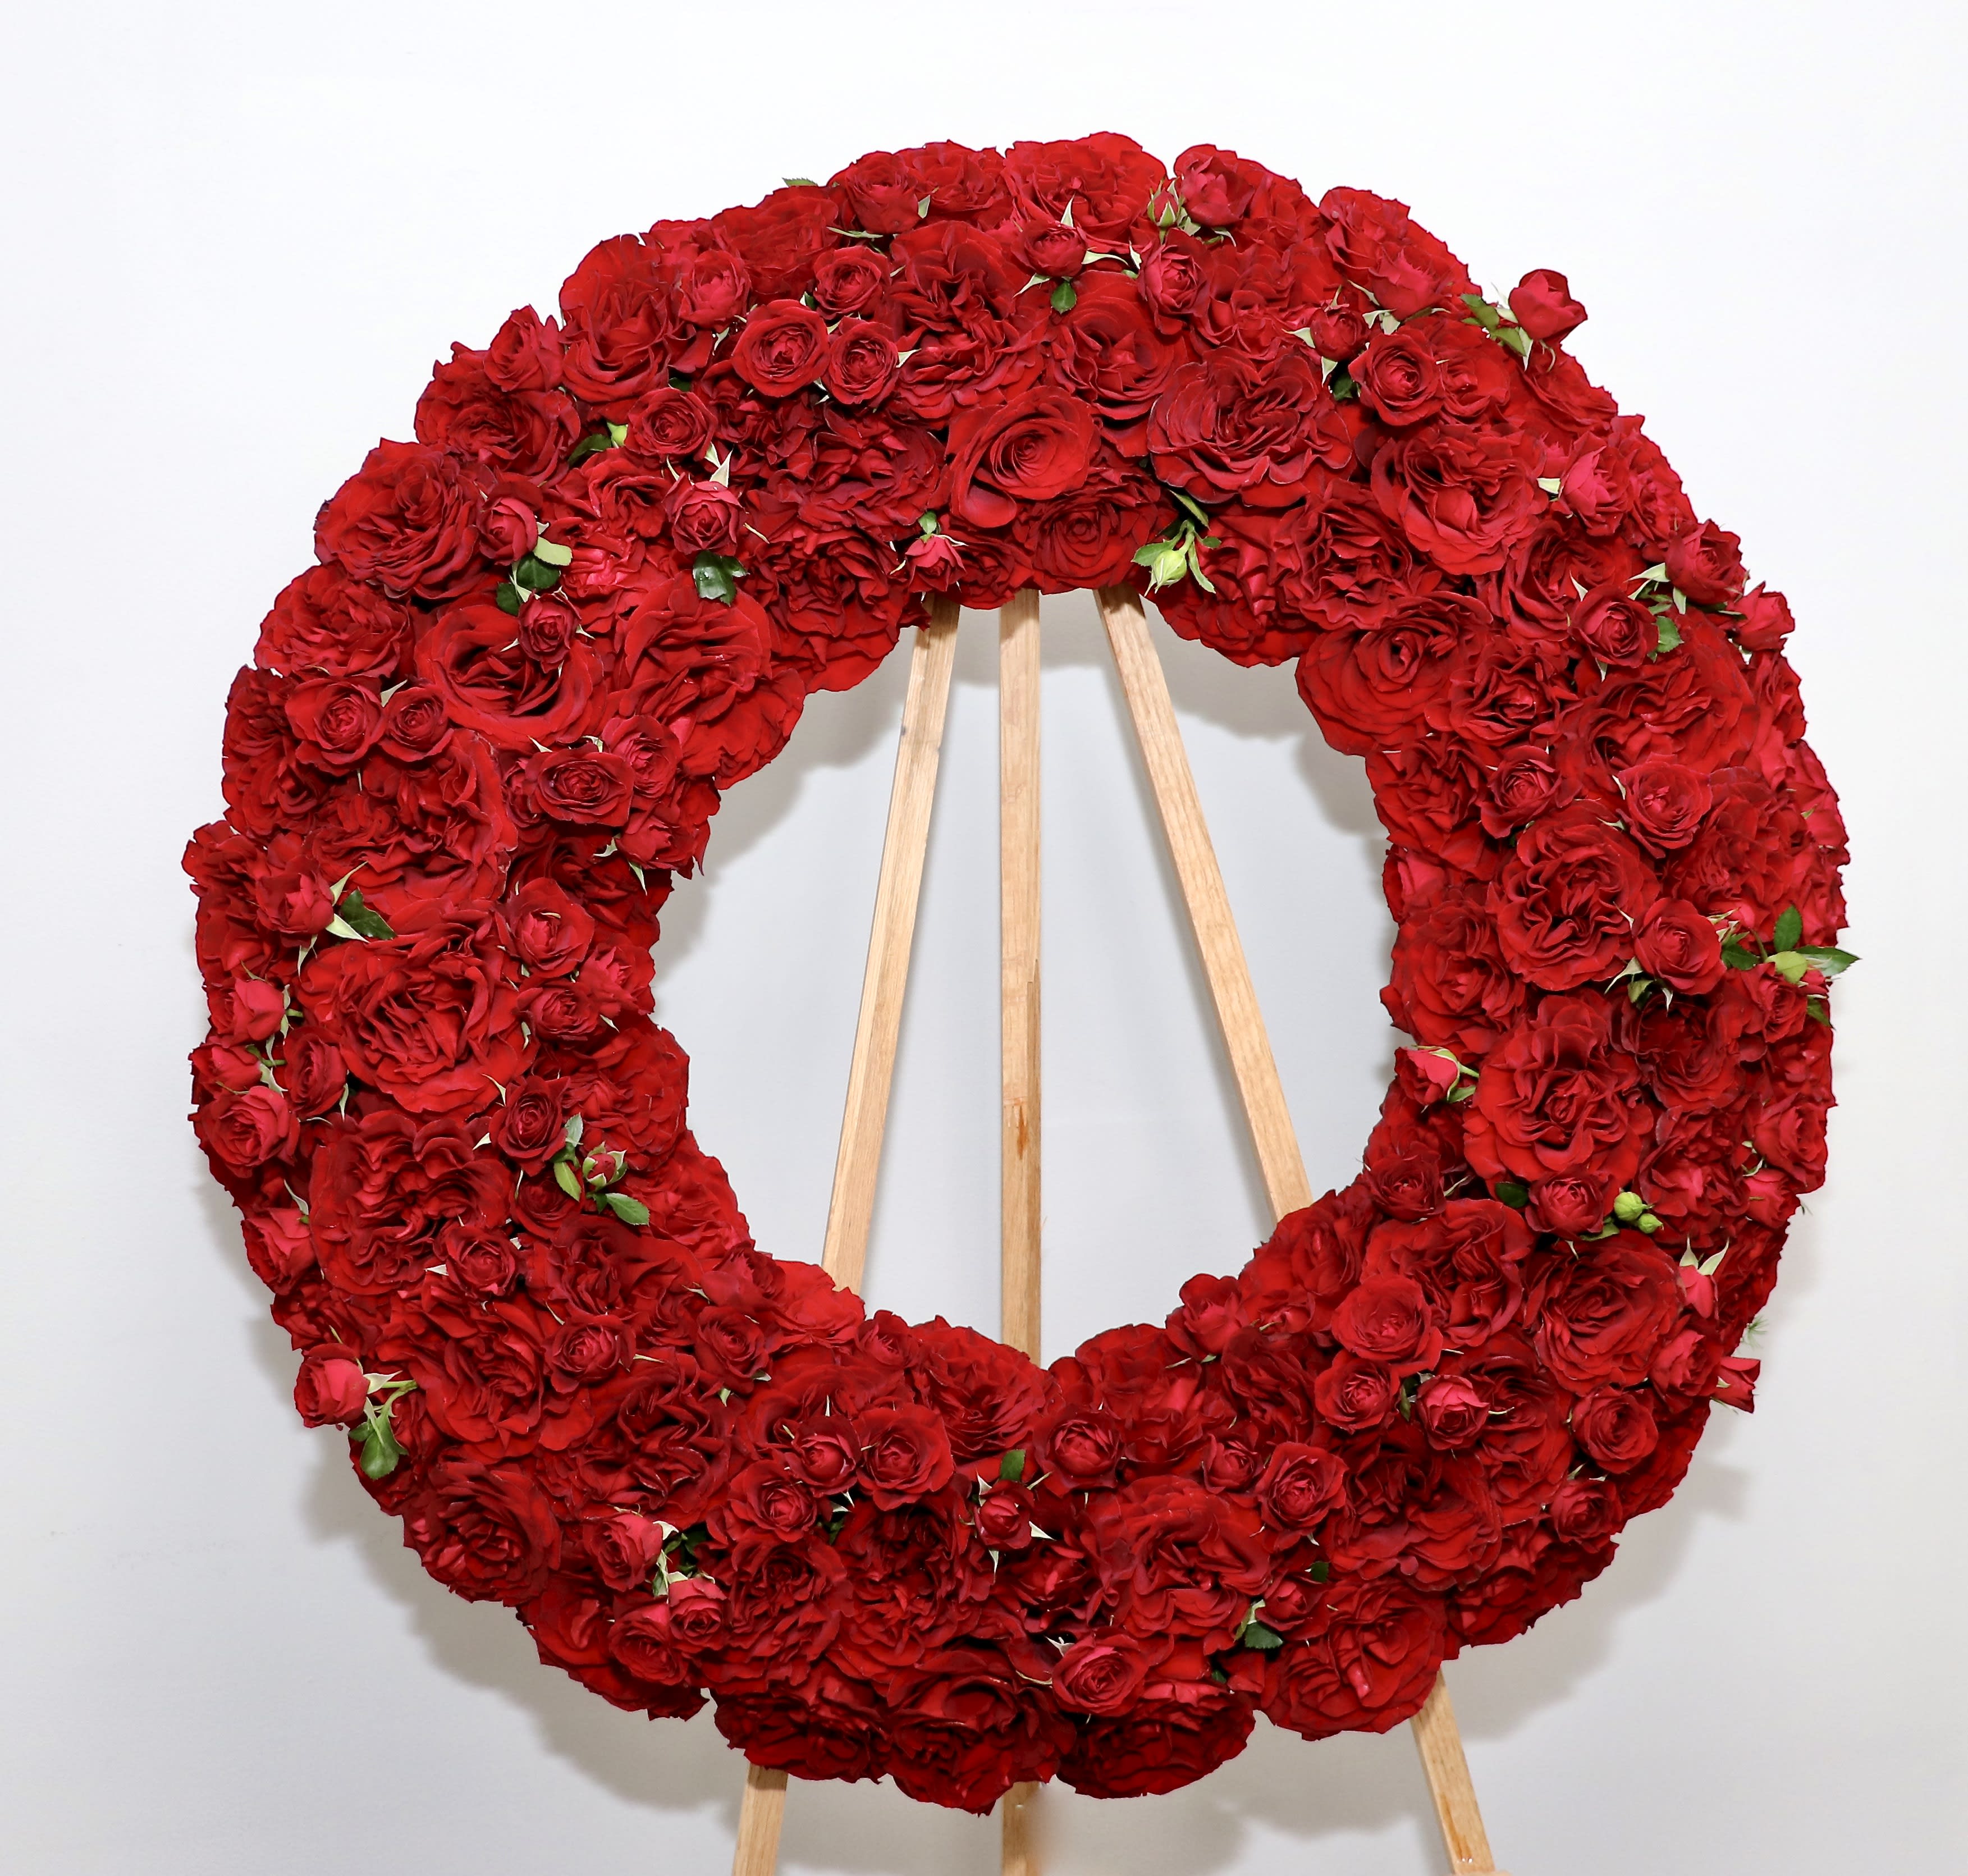 Red Rose Wonder Wreath - This wreath includes premium Ecuadorian red roses.  We include easel, printed banner and delivery (some fees may apply).  Standard size is 30'', deluxe is 36'', and premium is 42''.